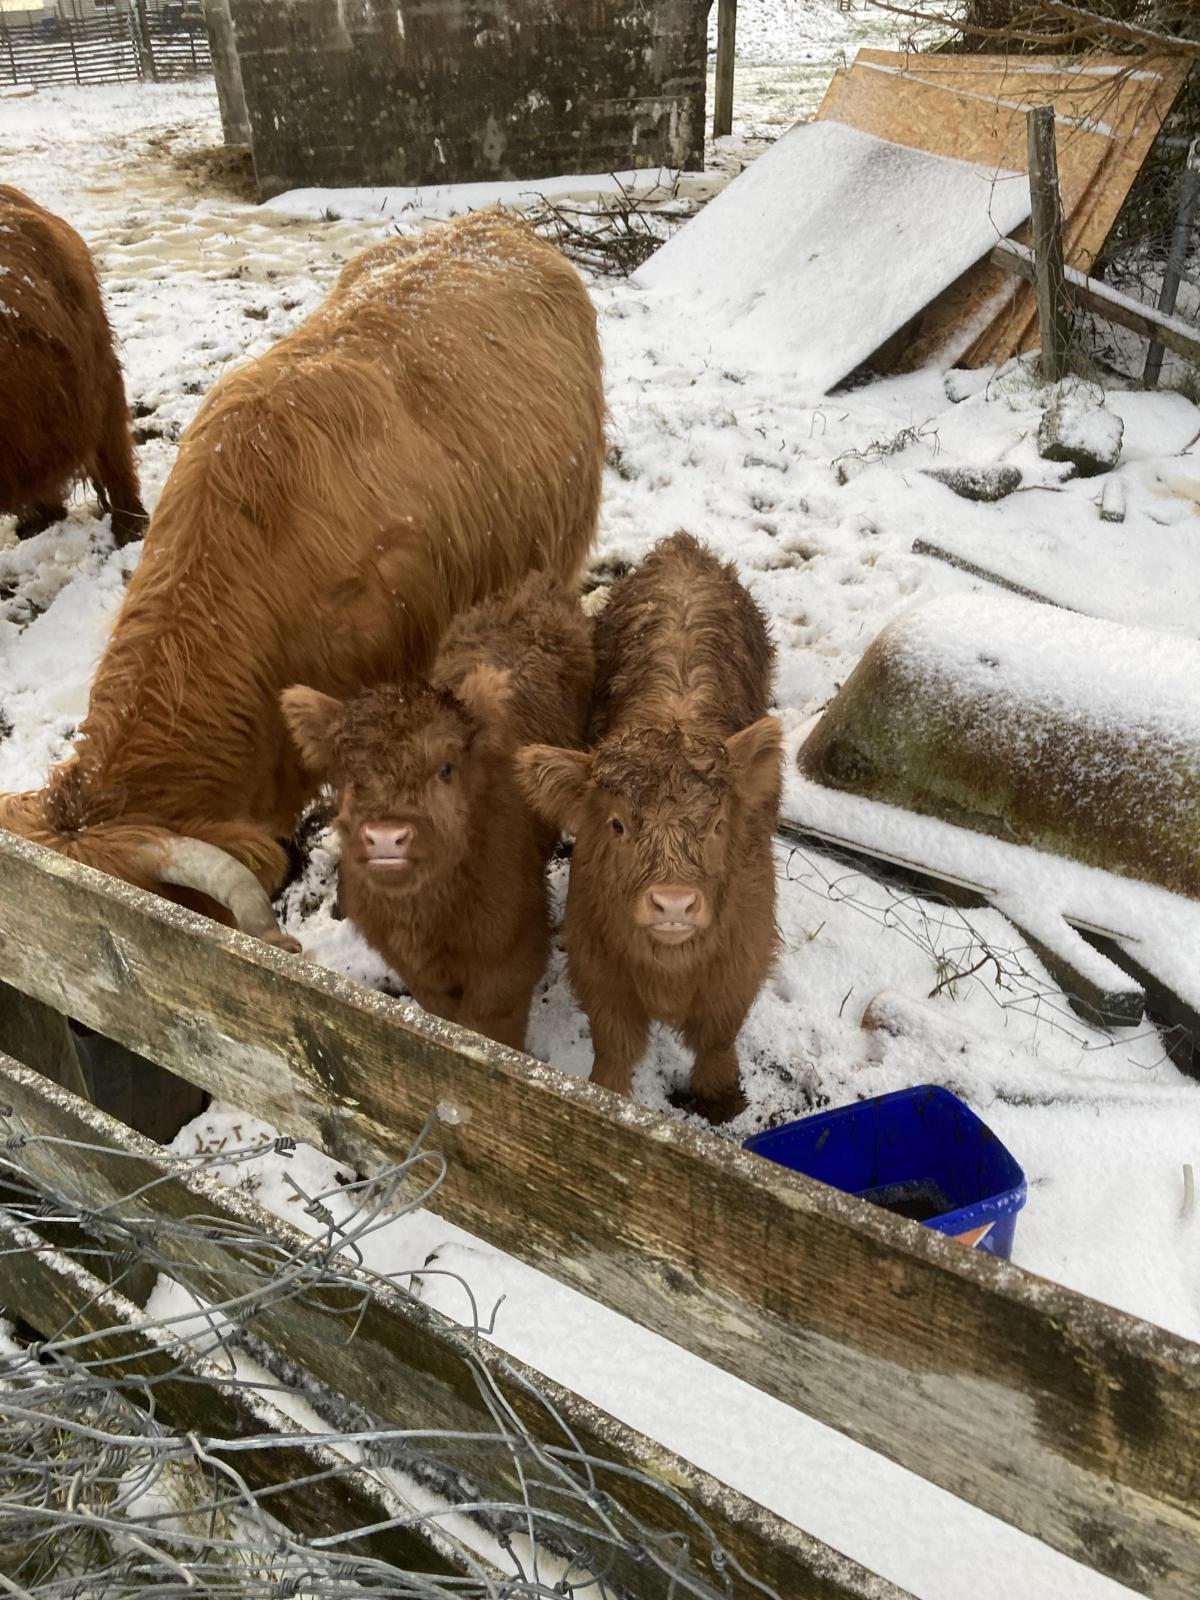 Anthony Robson - We don’t mind snow in the Hebrides, Holly & Ivy, Highland calves at Holm, Isle of Lewis